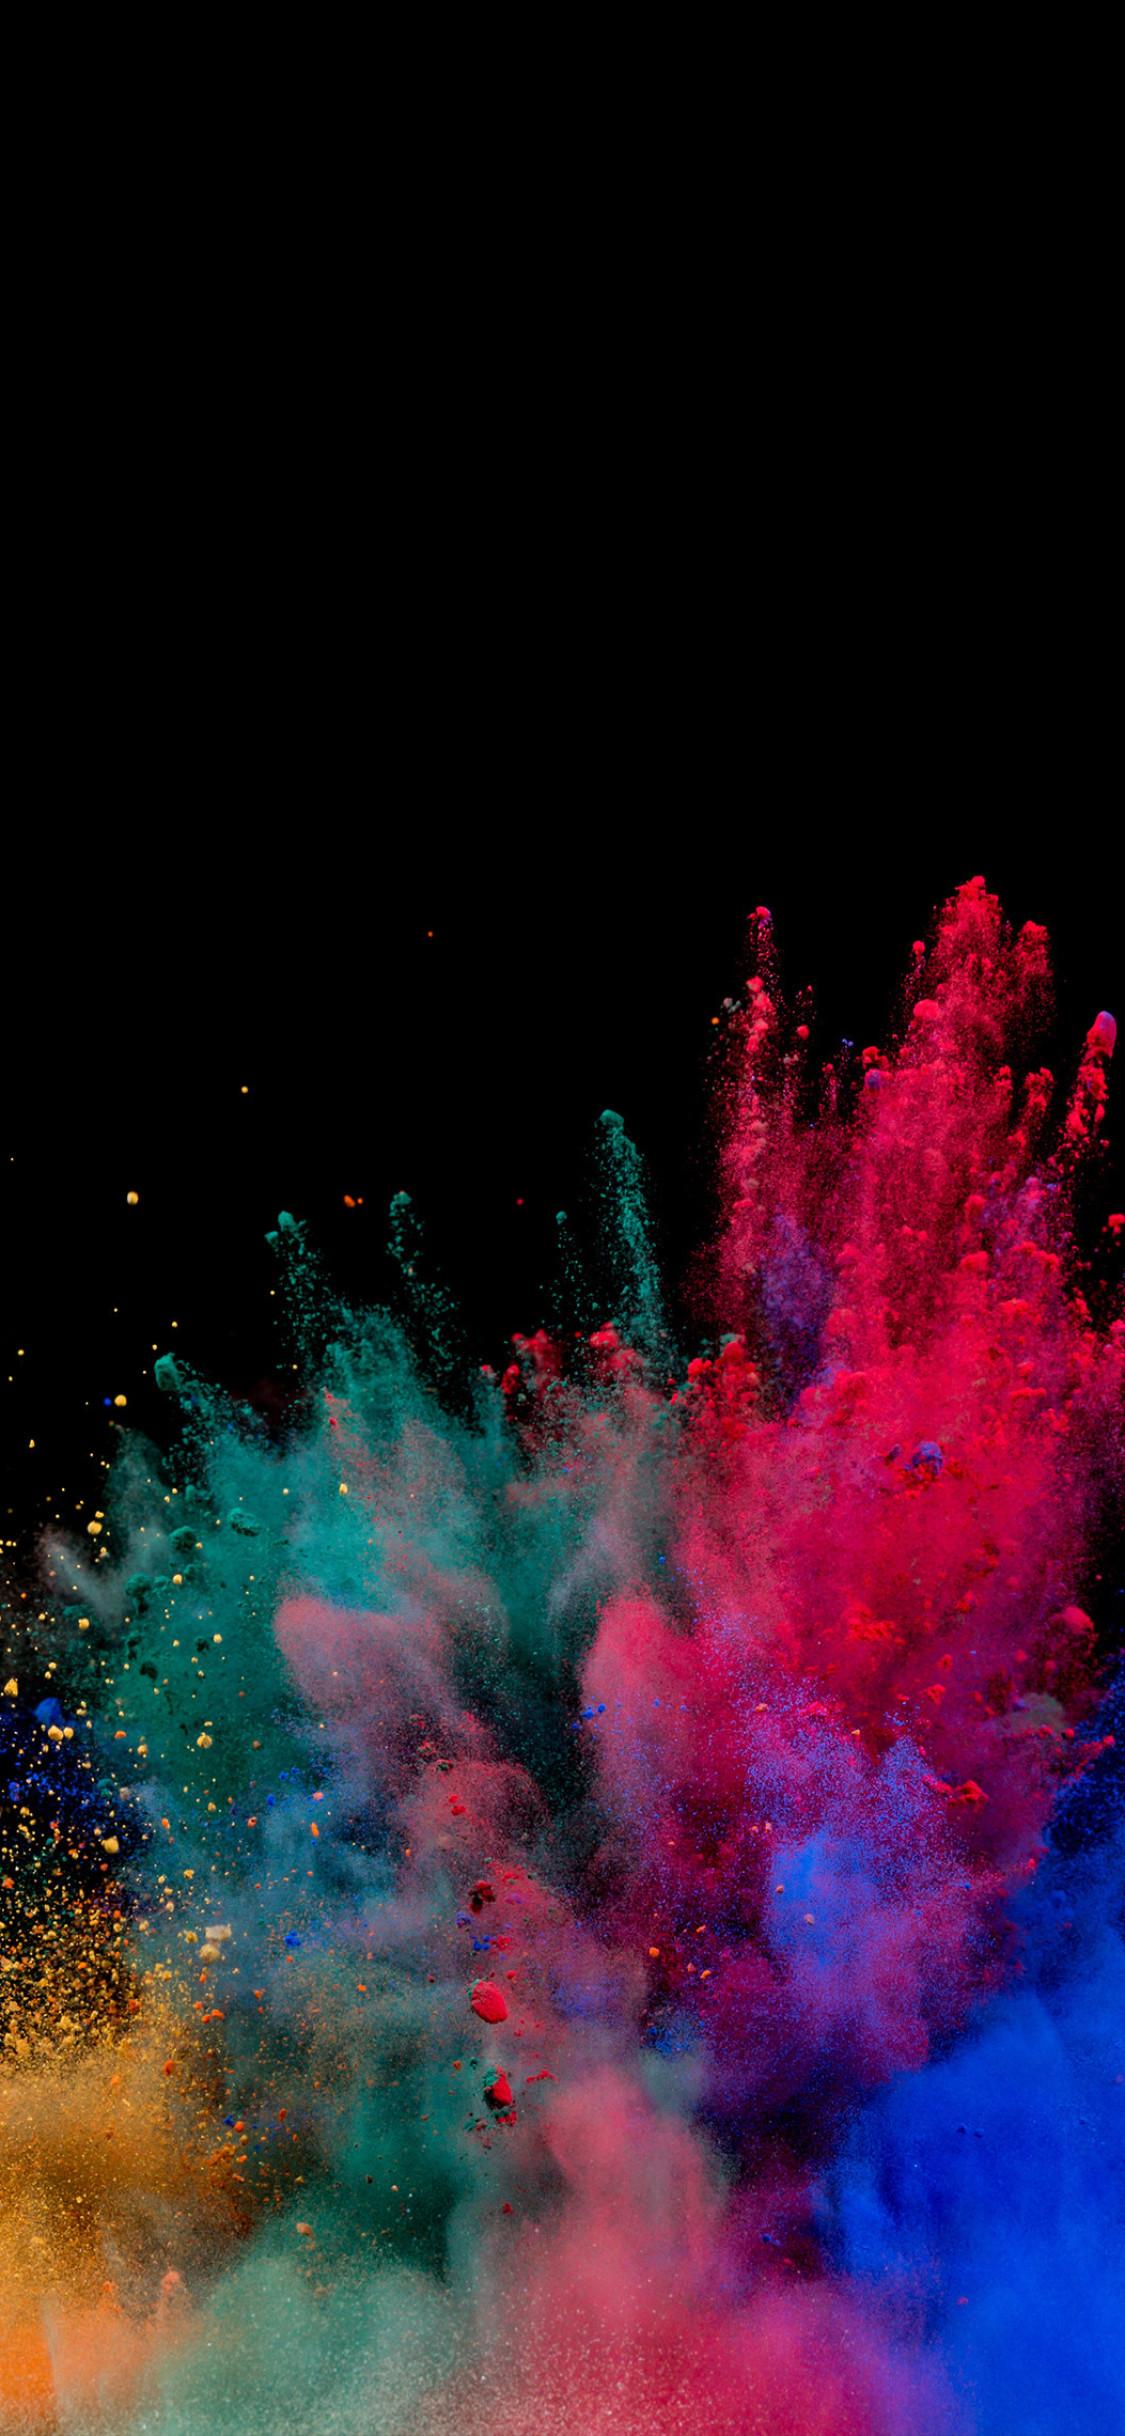 1125x2436 Colorful Powder Explosion Iphone XS,Iphone 10,Iphone X